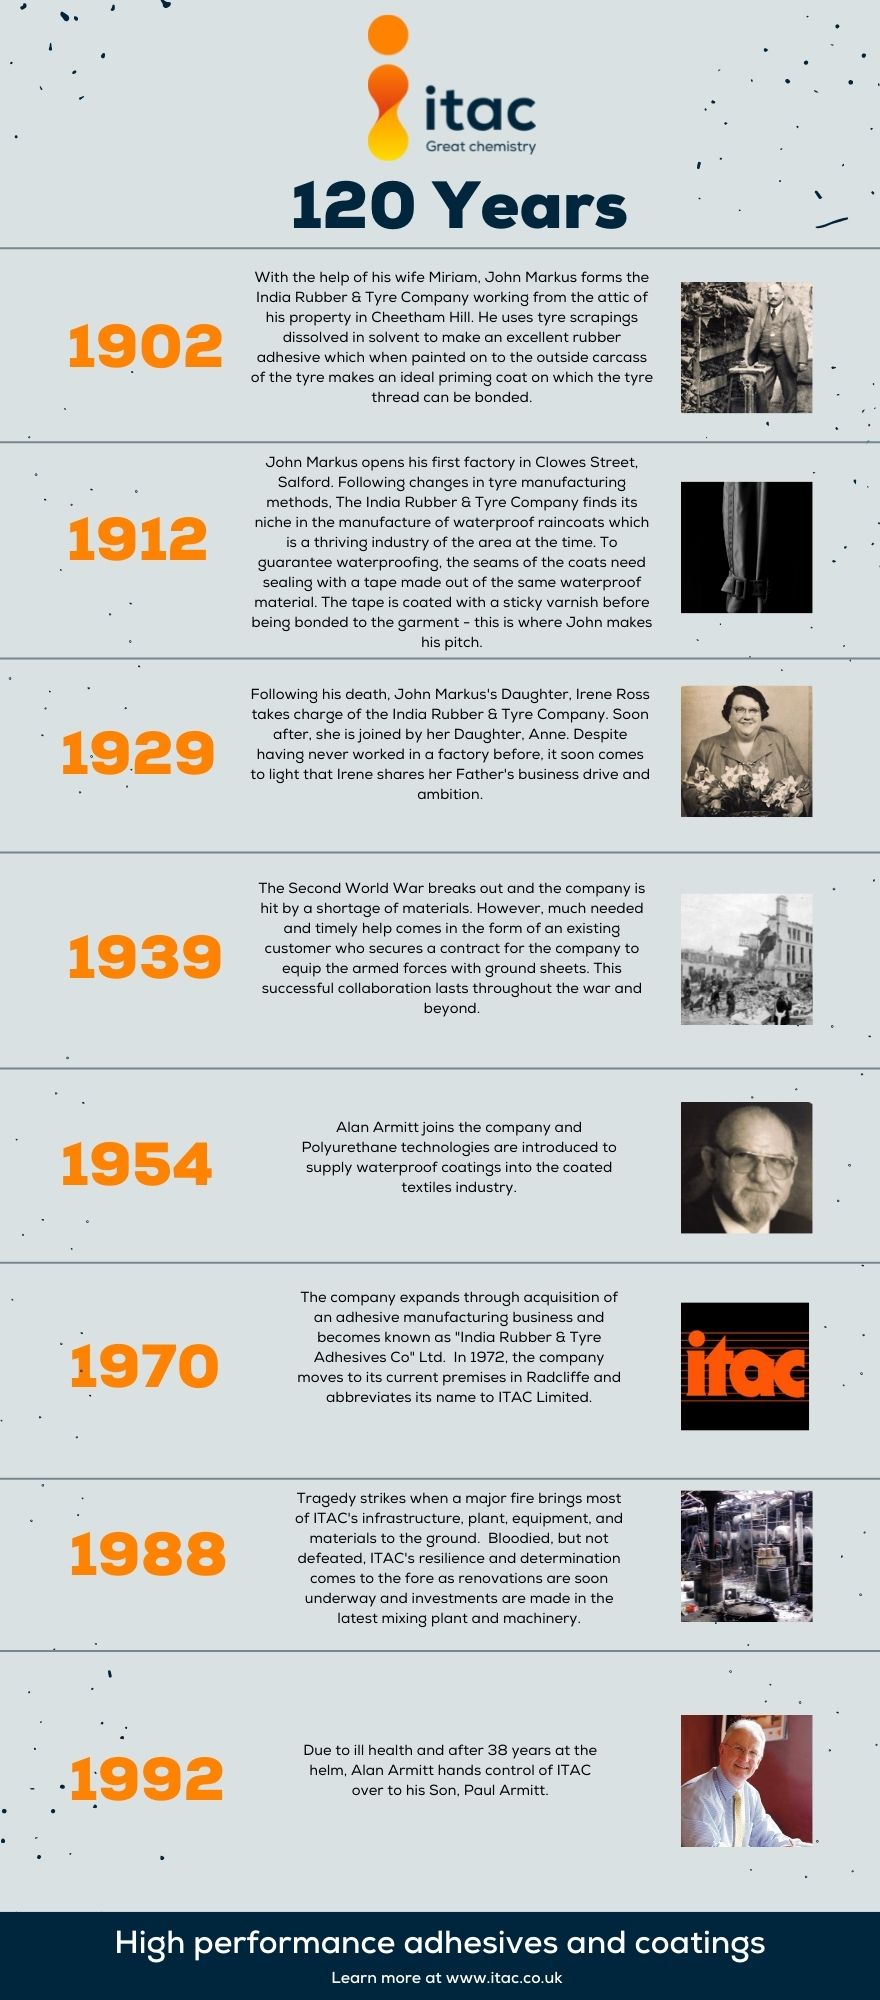 Infographic illustrating Itac's history since 1902